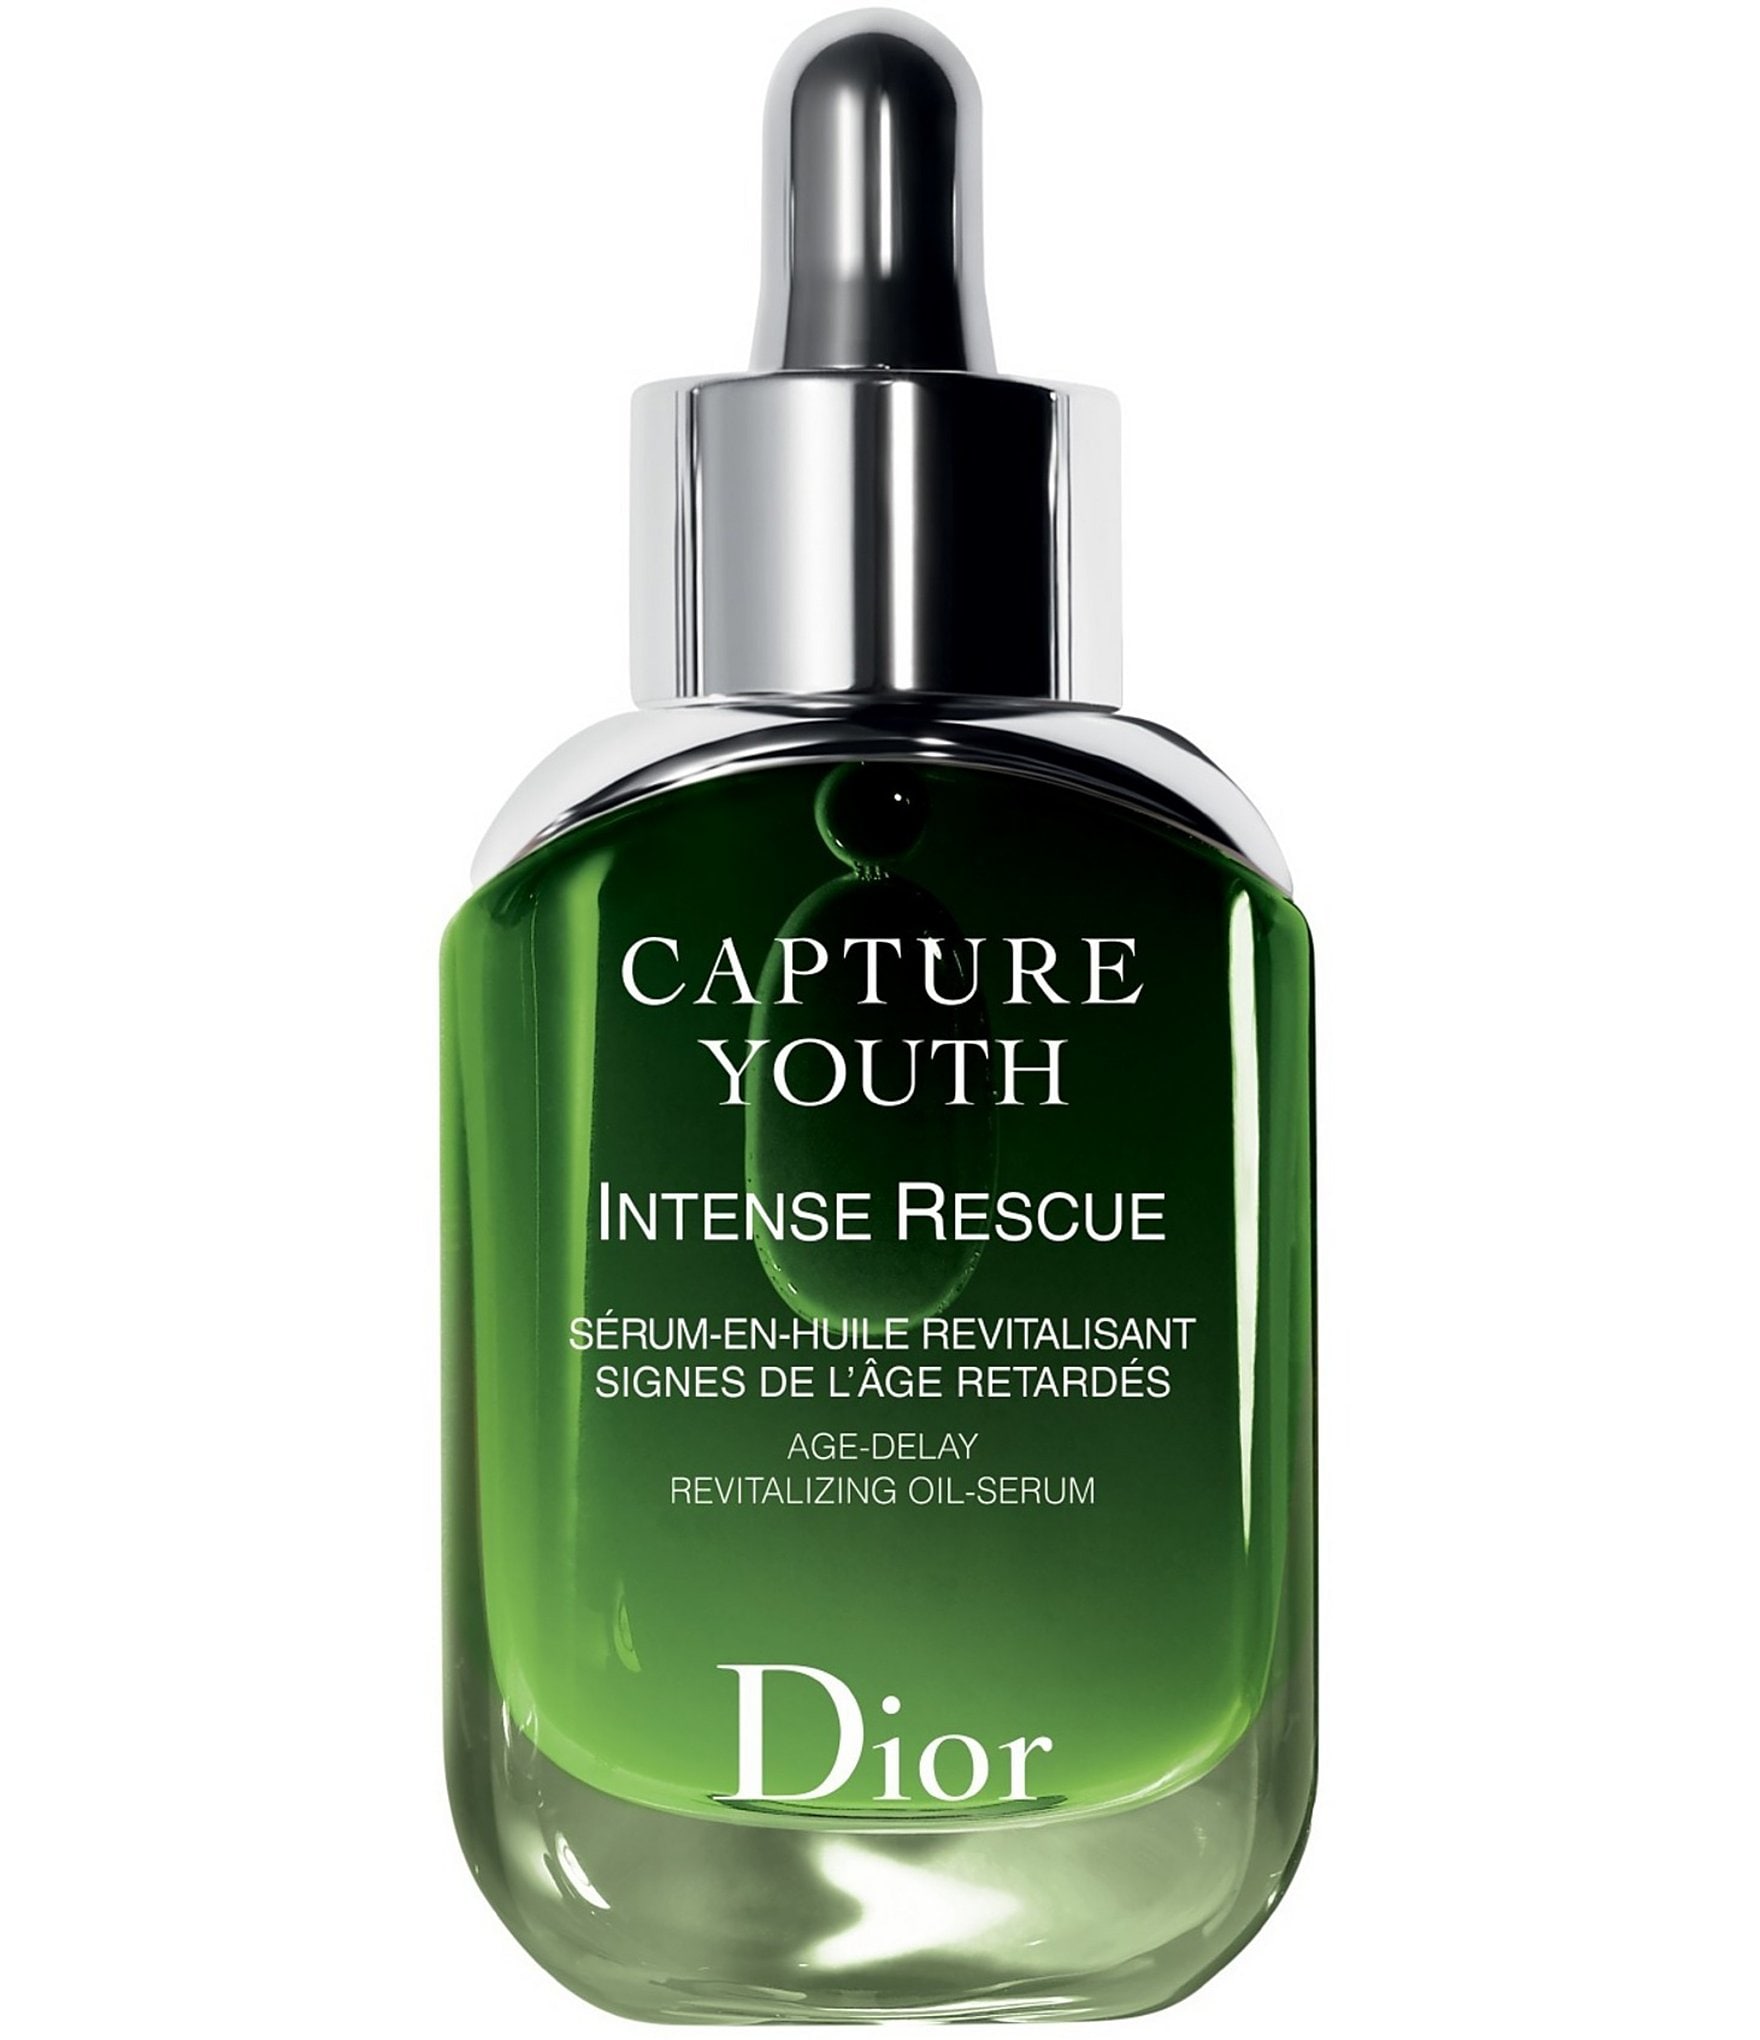 dior capture youth intense rescue serum review